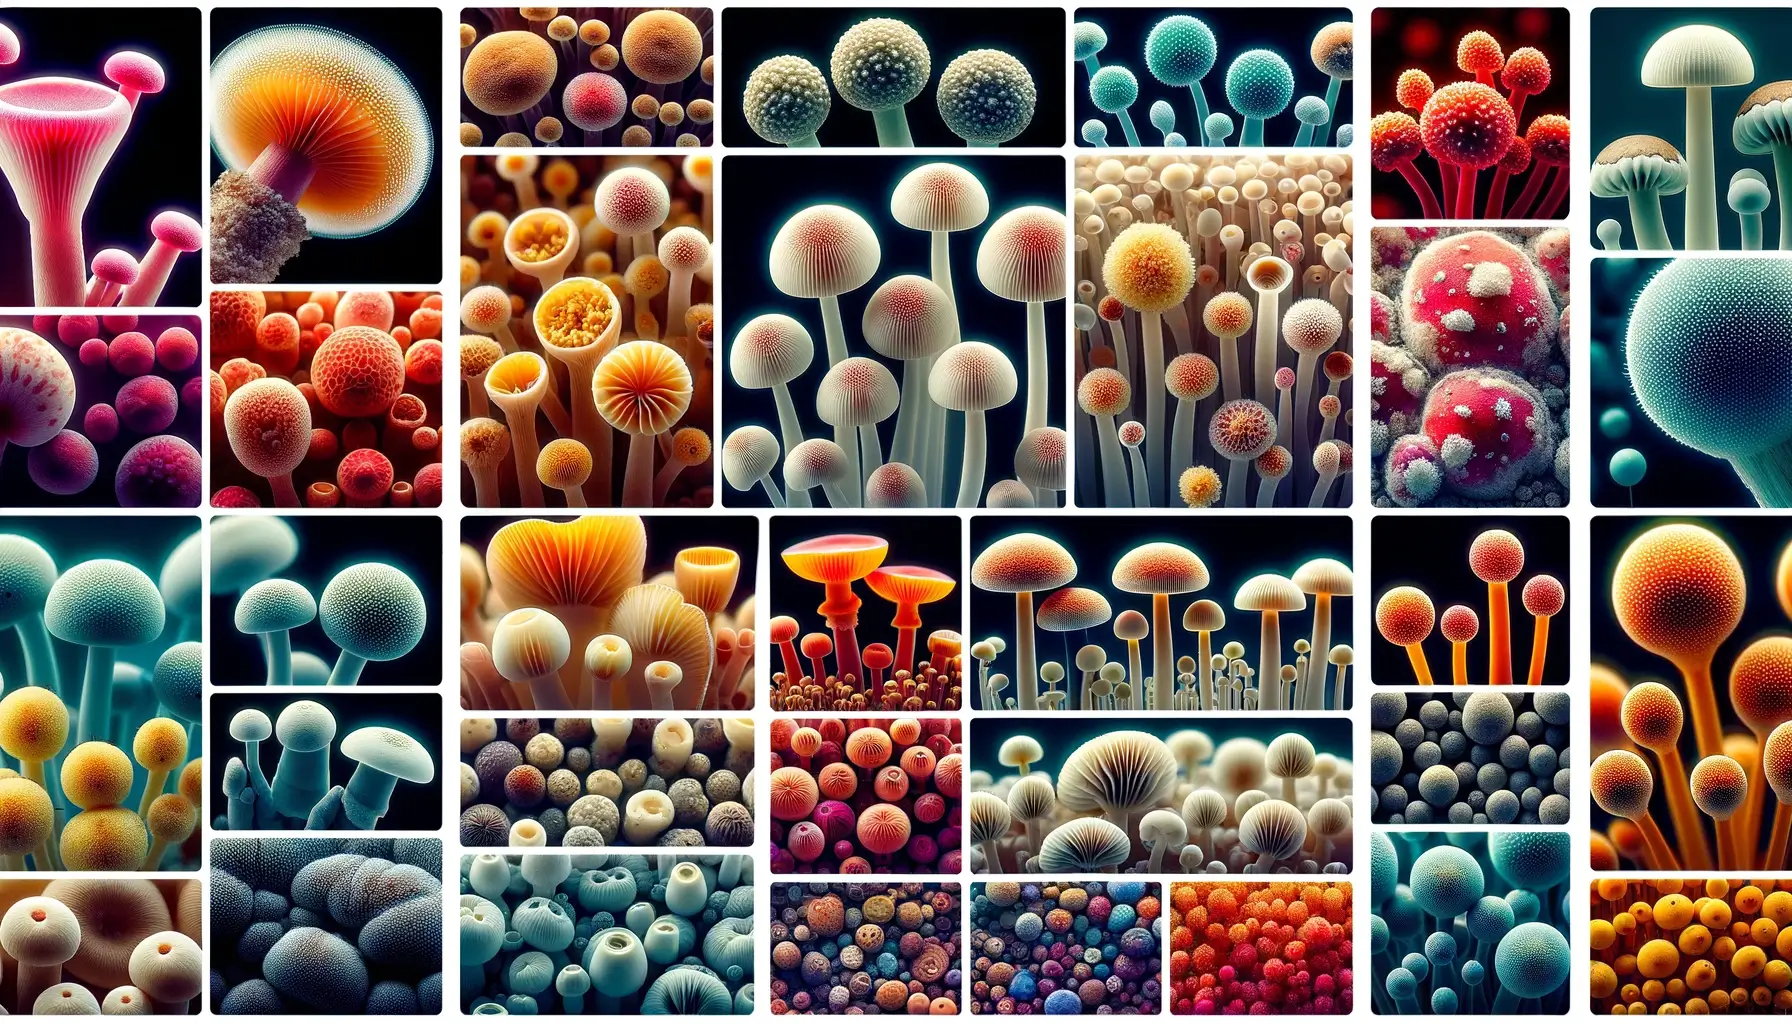 various types of mushroom spores under a microscope, showing a range of colors and patterns